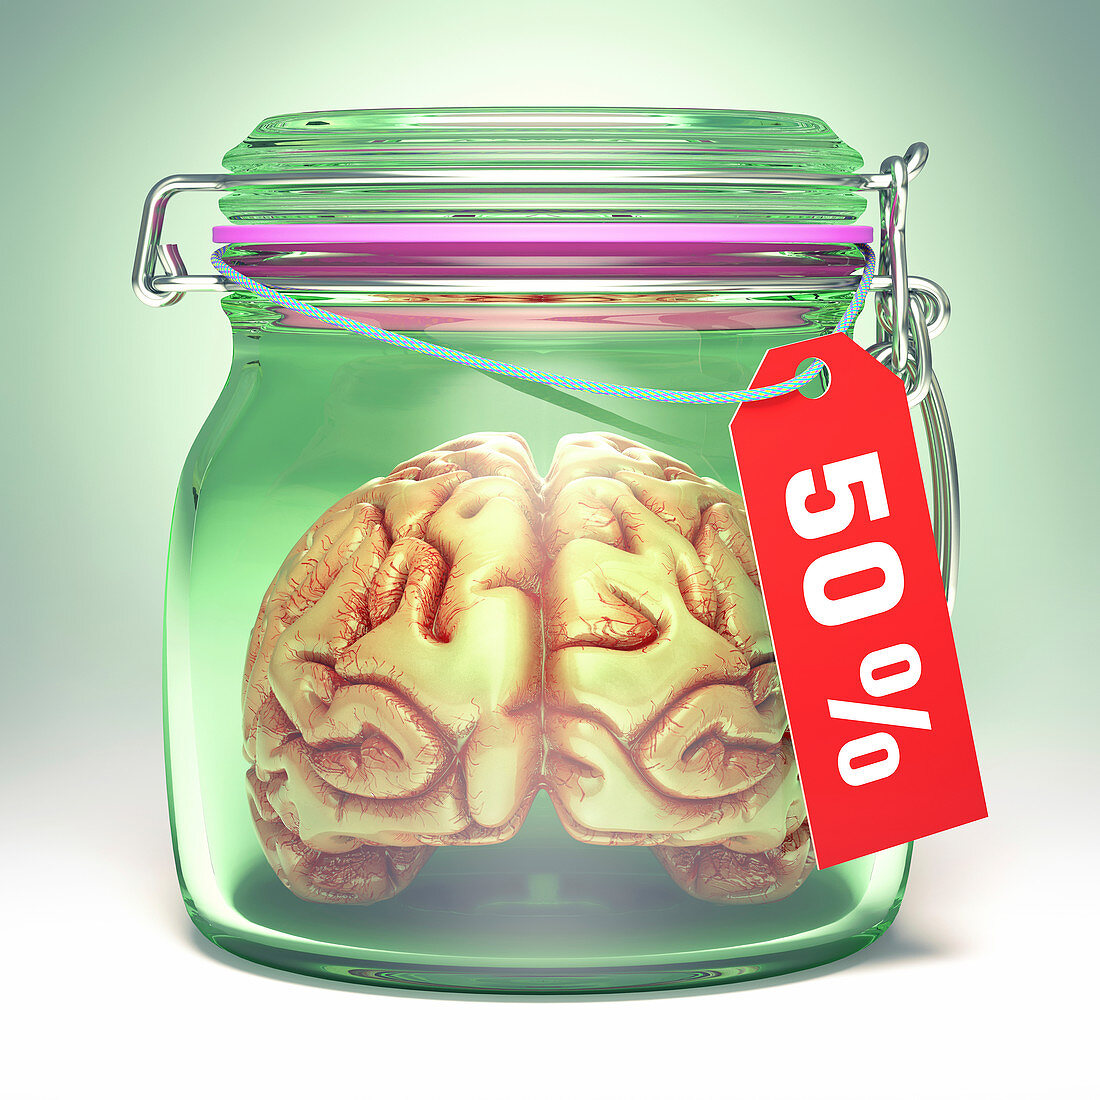 Human brain in glass jar with sale label